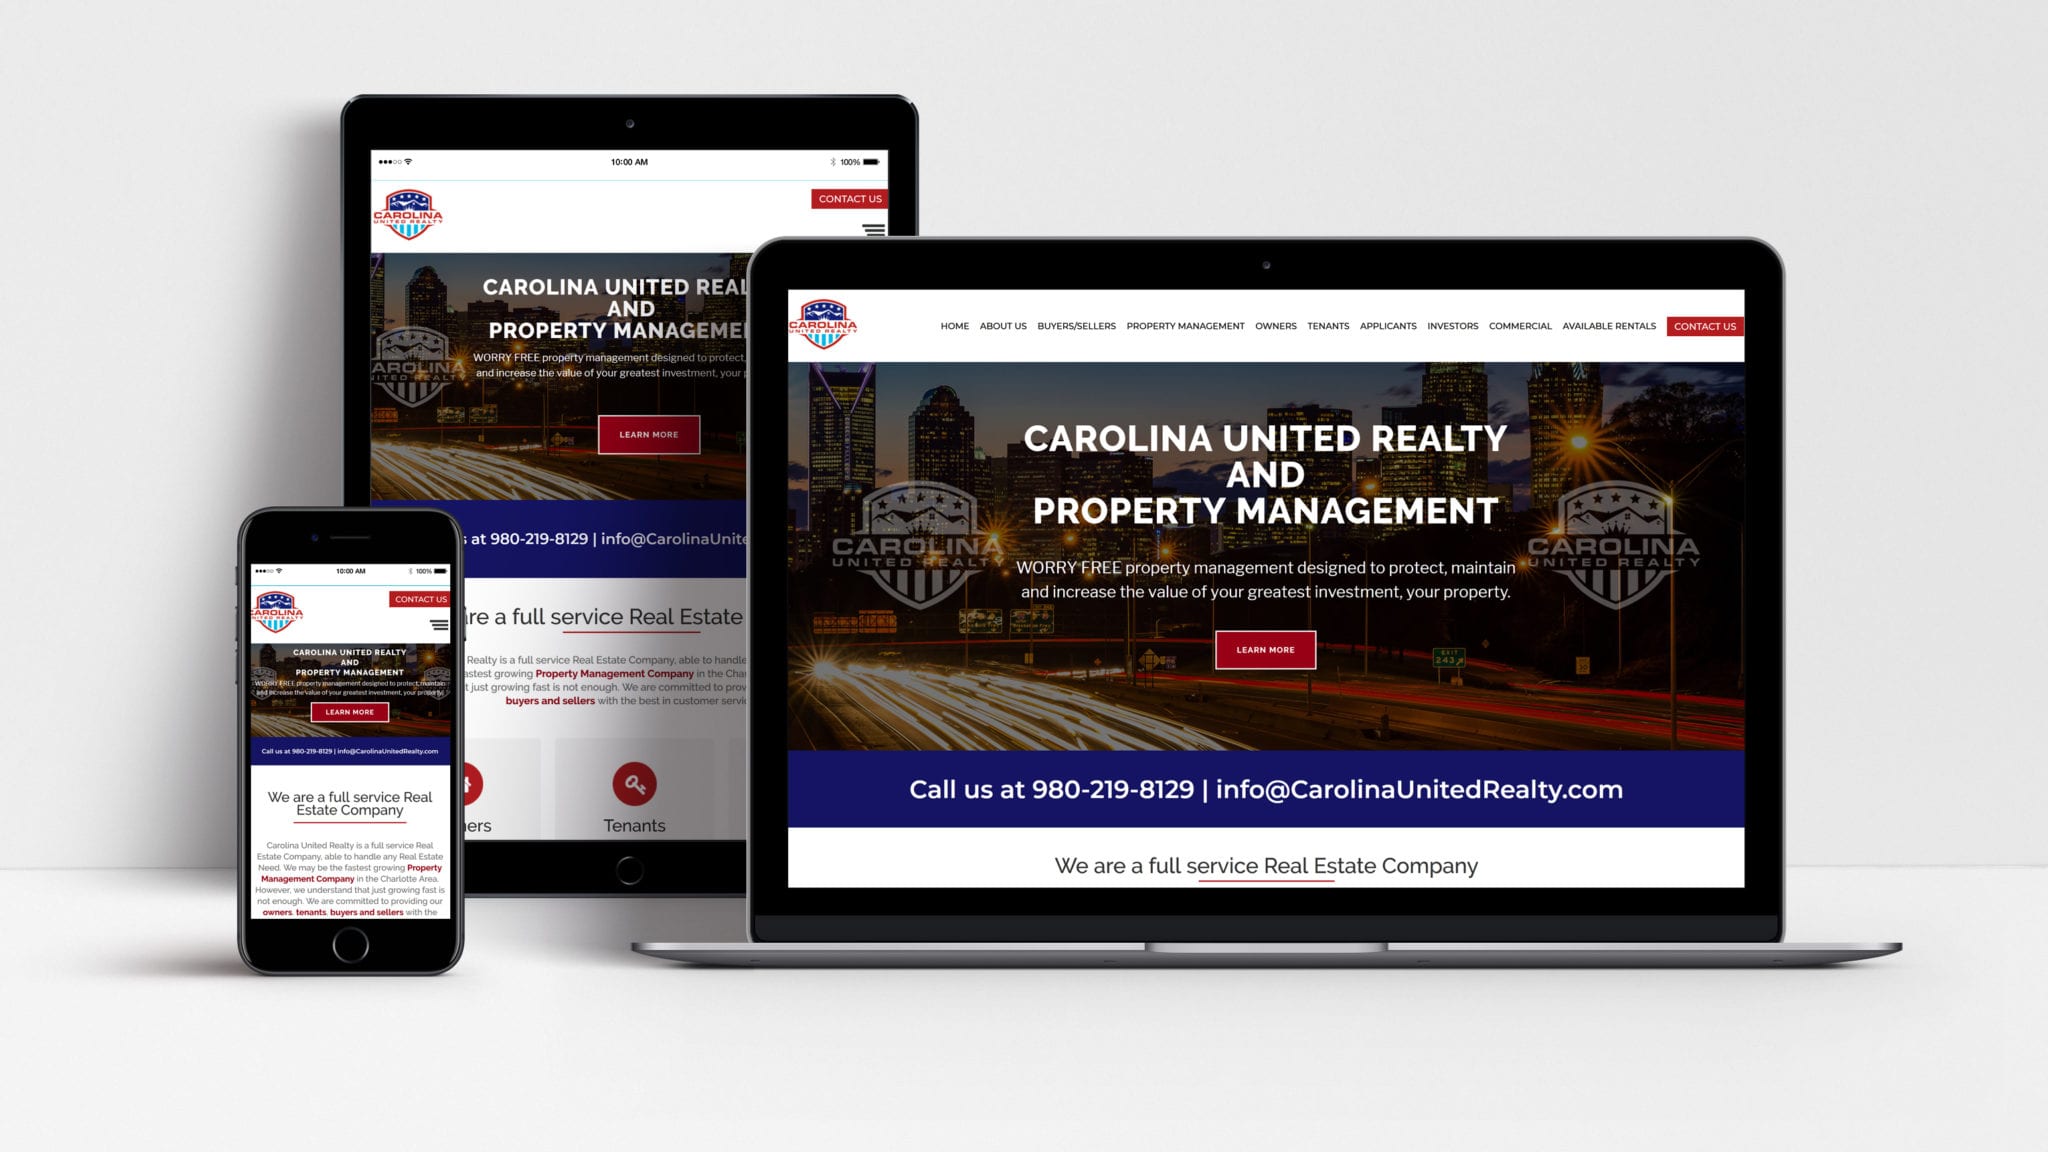 Carolina United Realty website shown on laptop, tablet and mobile phone